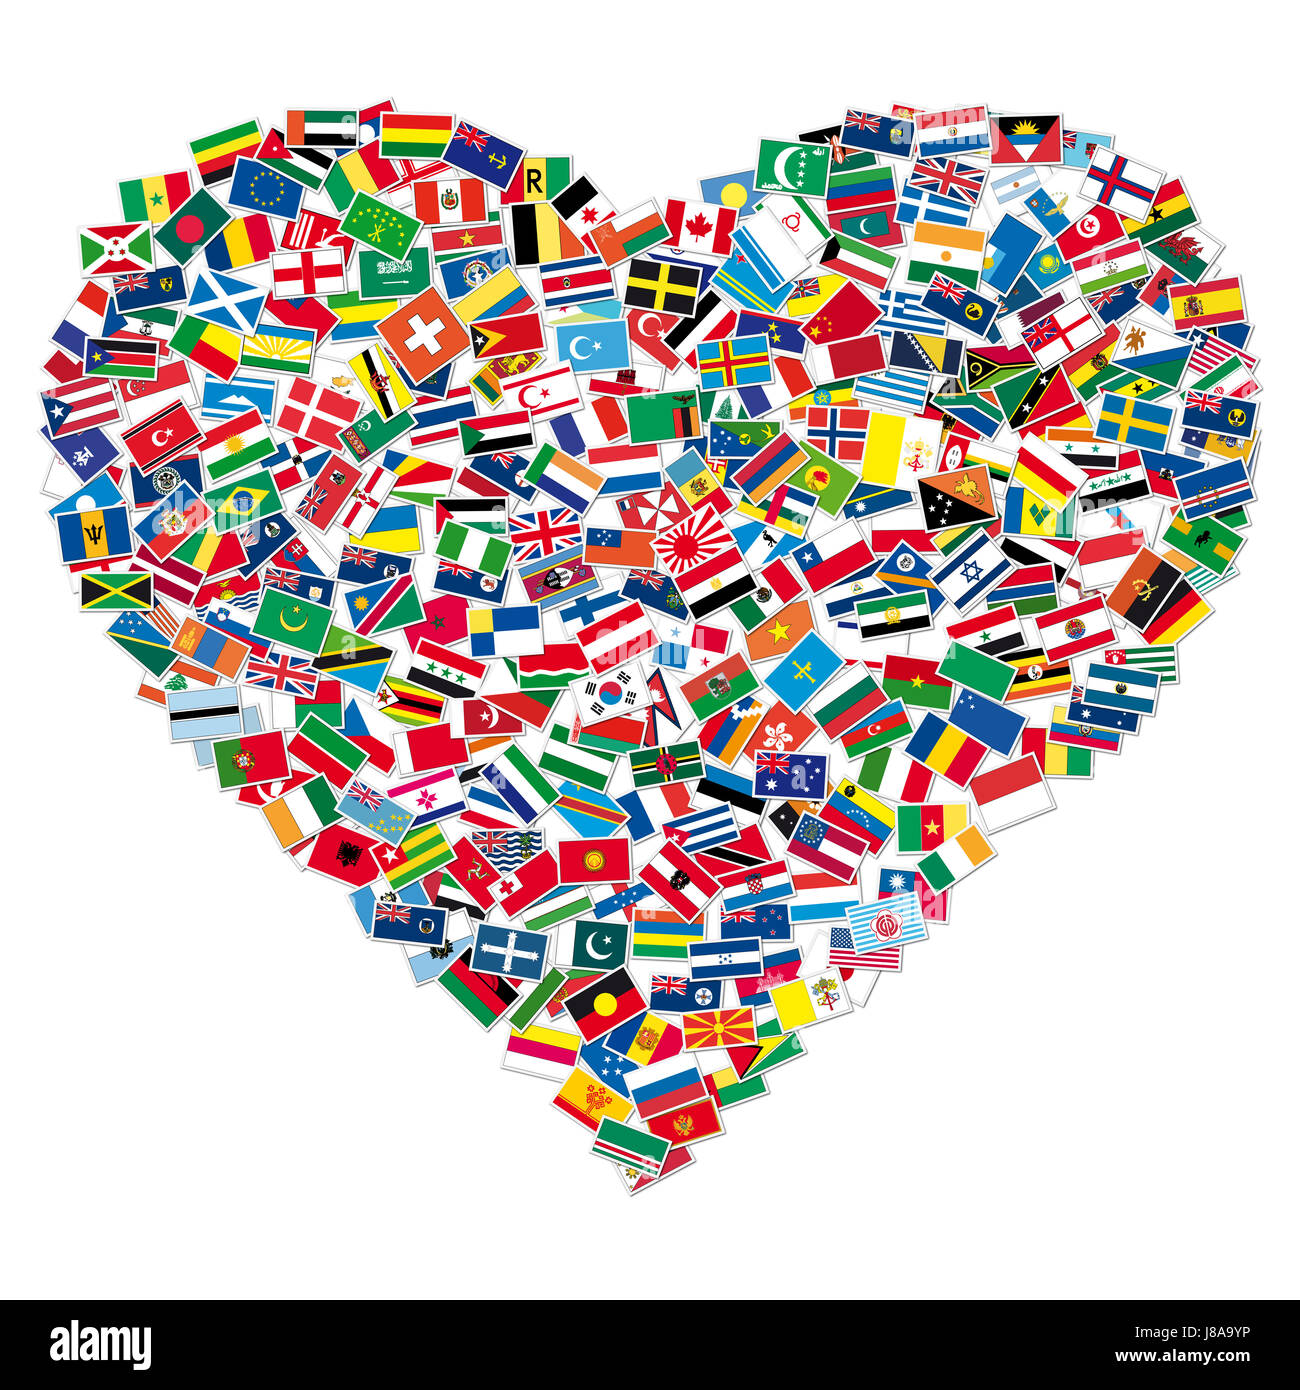 heart, flag, flags, countries, globe, planet, earth, world, continents, Stock Photo